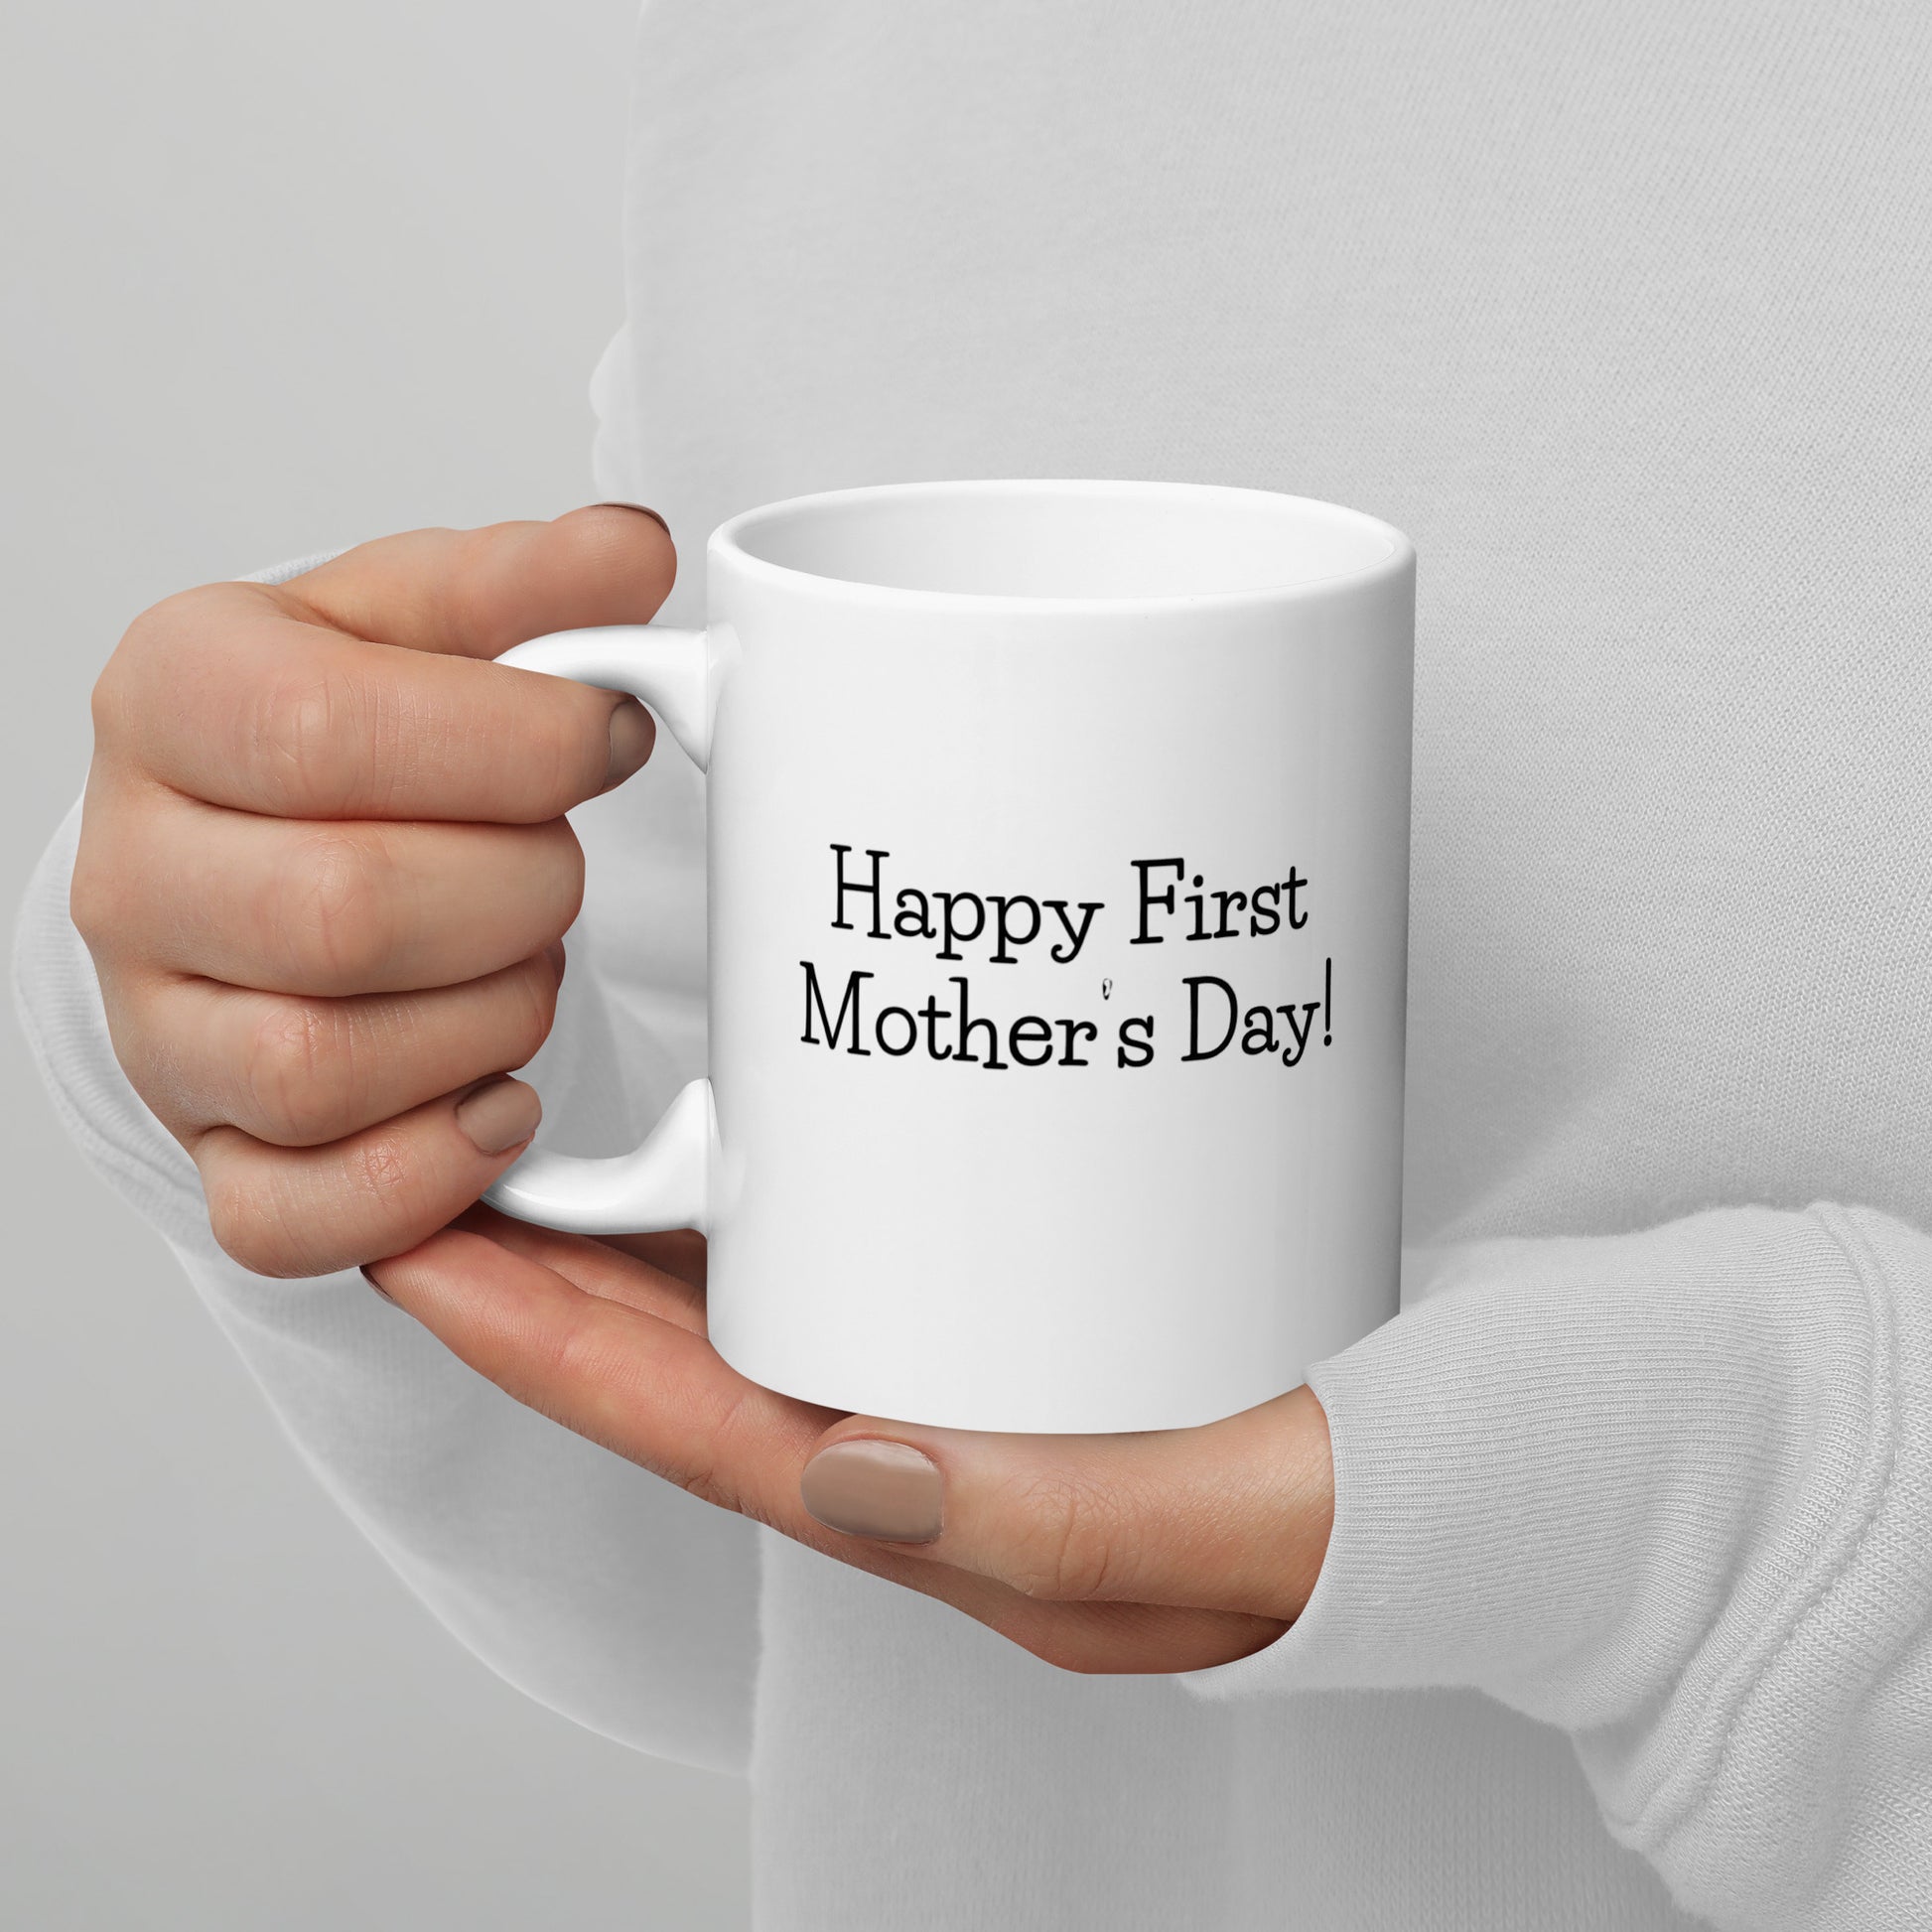 Happy First Mothers Day Coffee Mug - Mothers Day Gift - Coffee Mug for Mom - Gift for Mom - 11oz